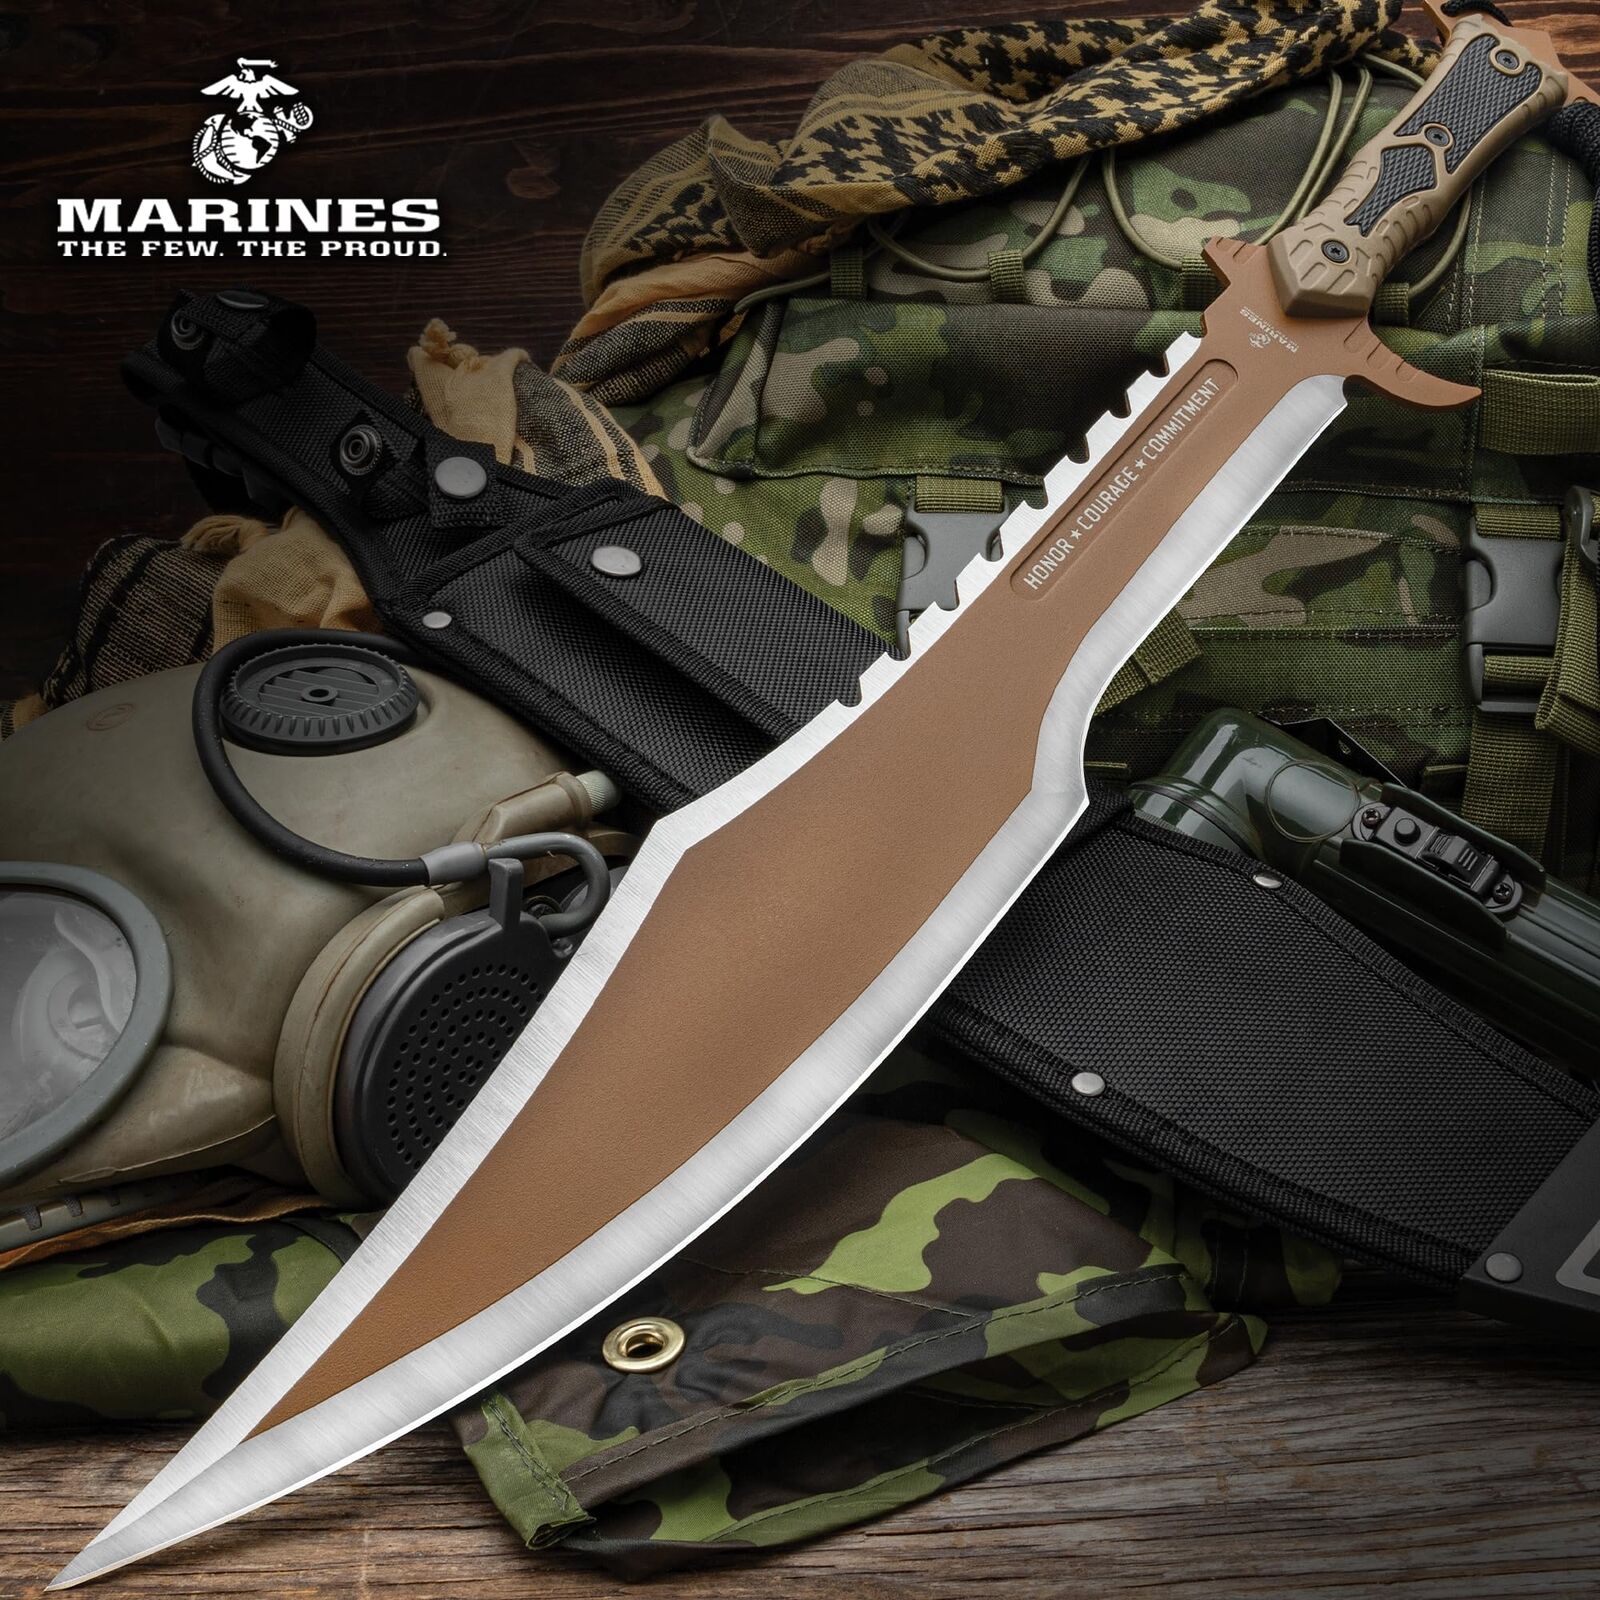 USMC Desert Ops Spartan Sword and Scabbard | Officially Licensed Tactical Sword